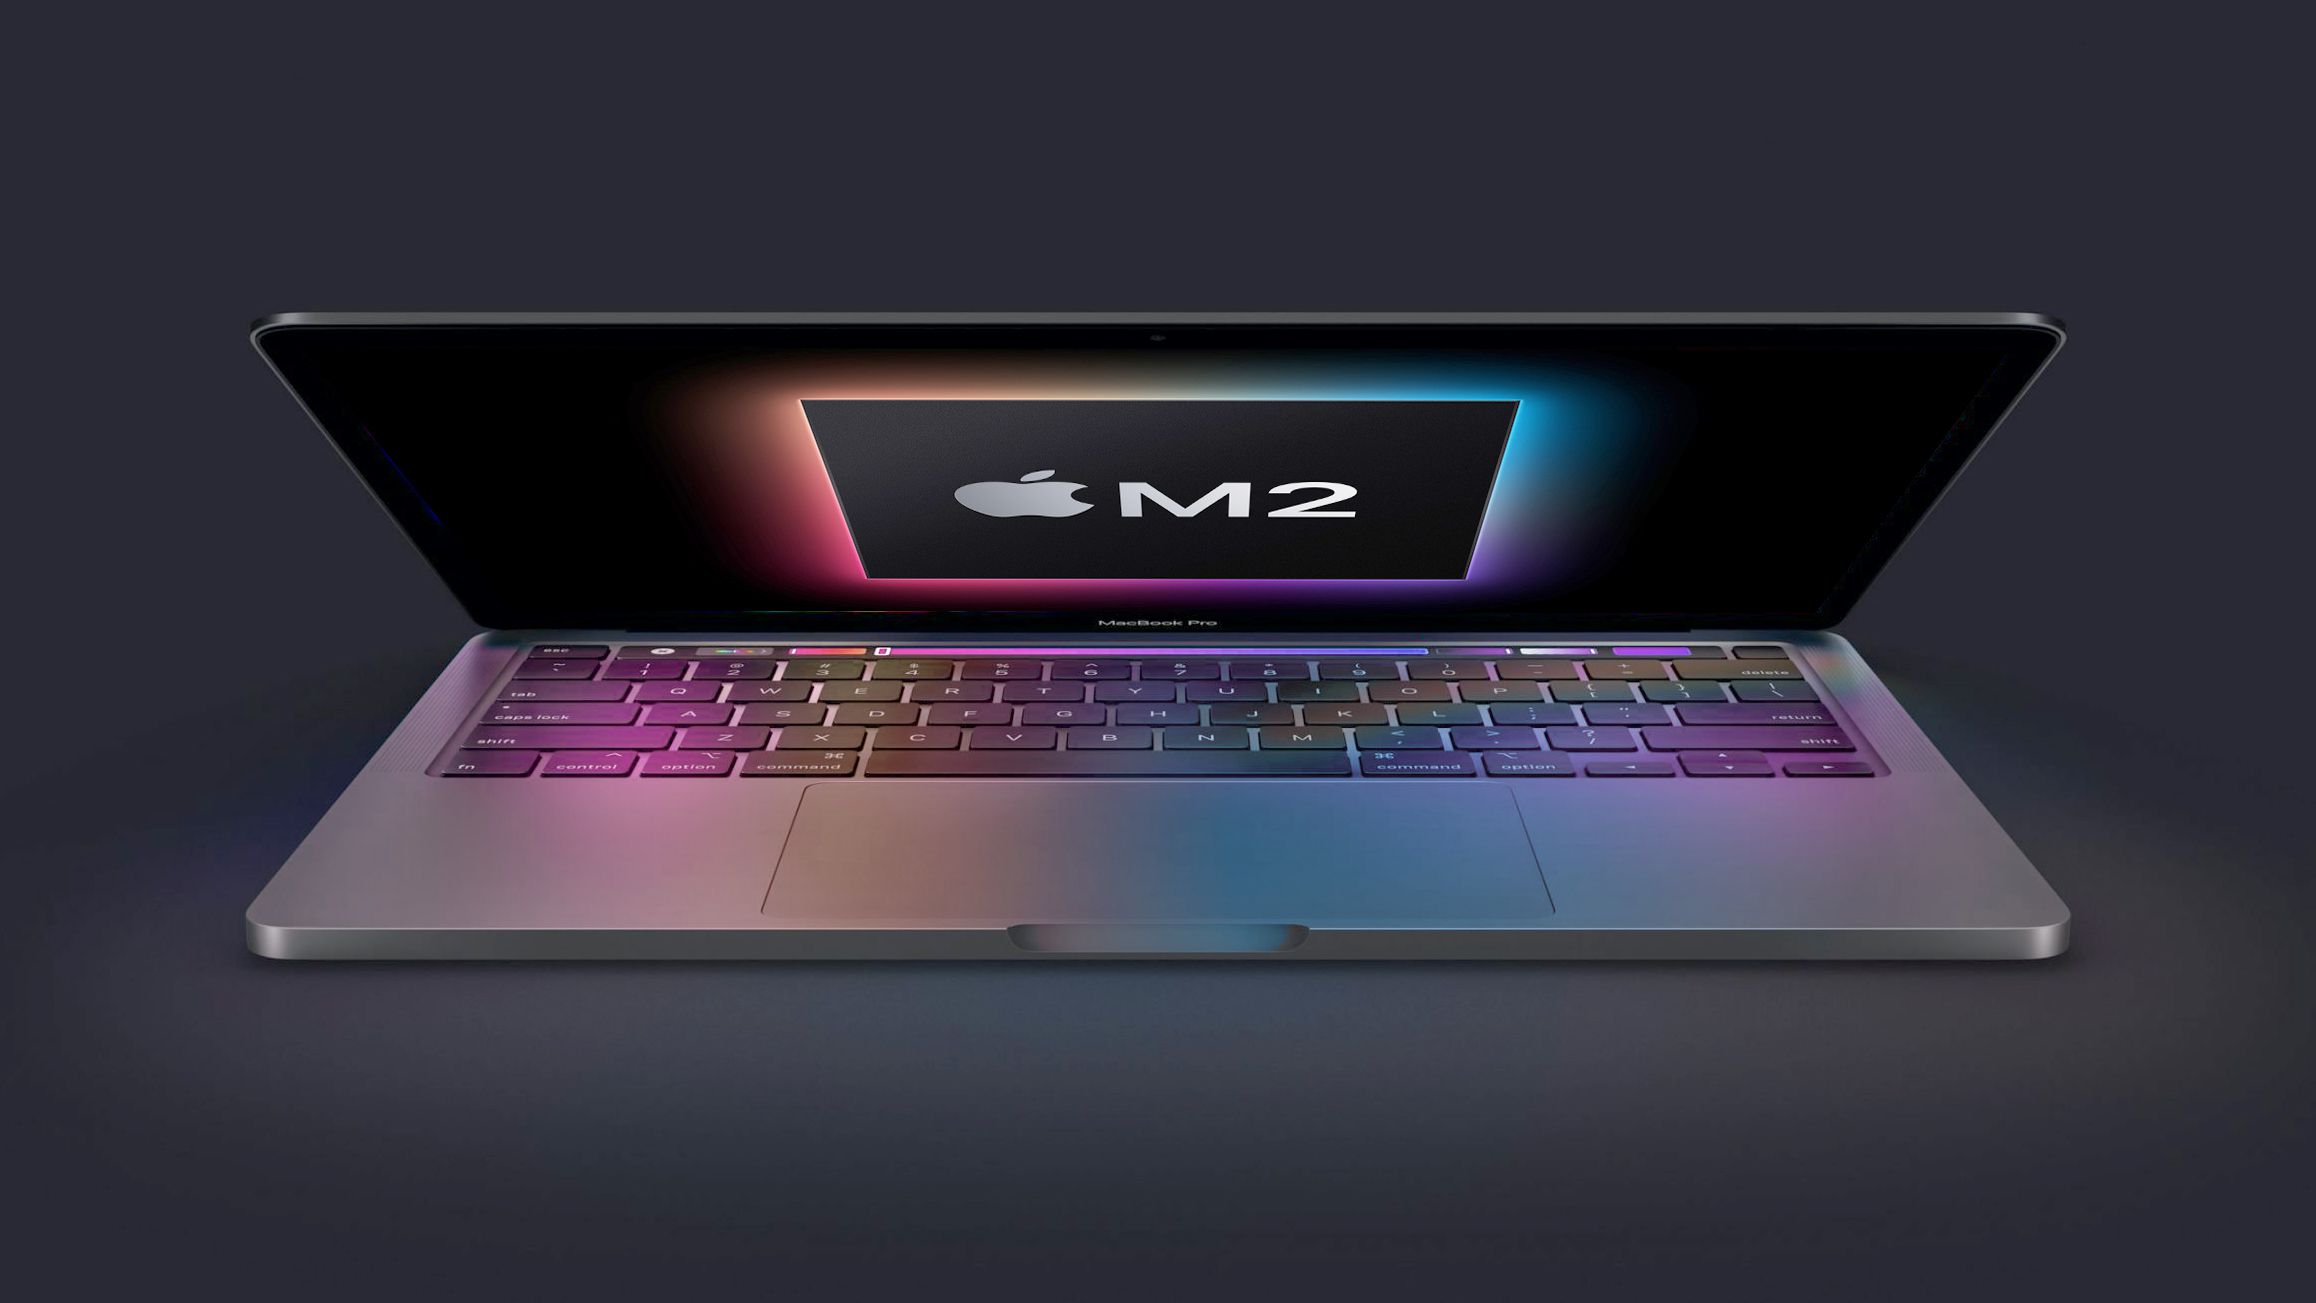 Apple is discontinuing the 13-inch MacBook Pro with Touch Bar